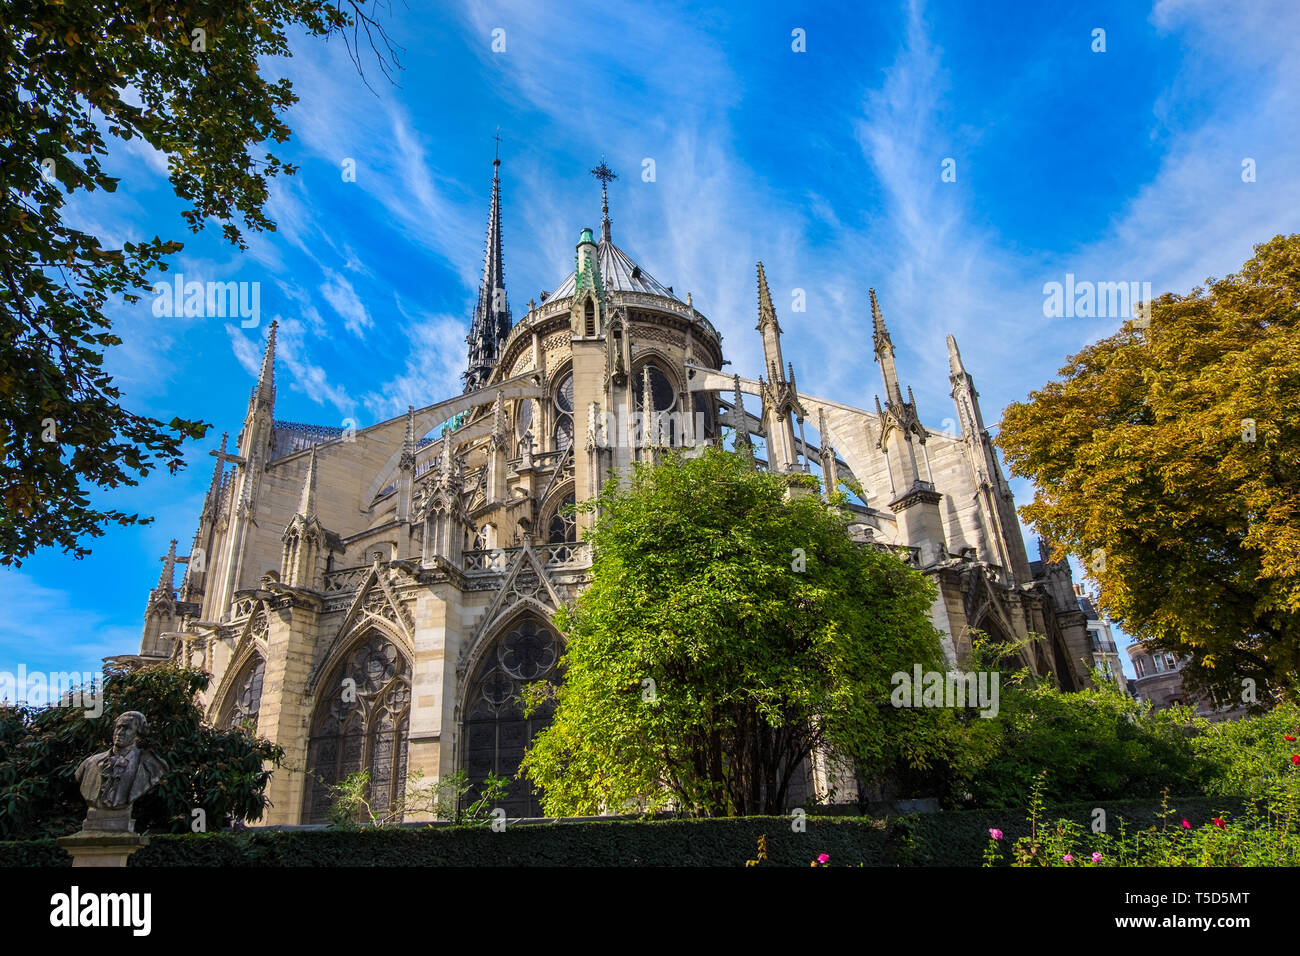 Notre Dame cathedral in Paris, France. Stock Photo